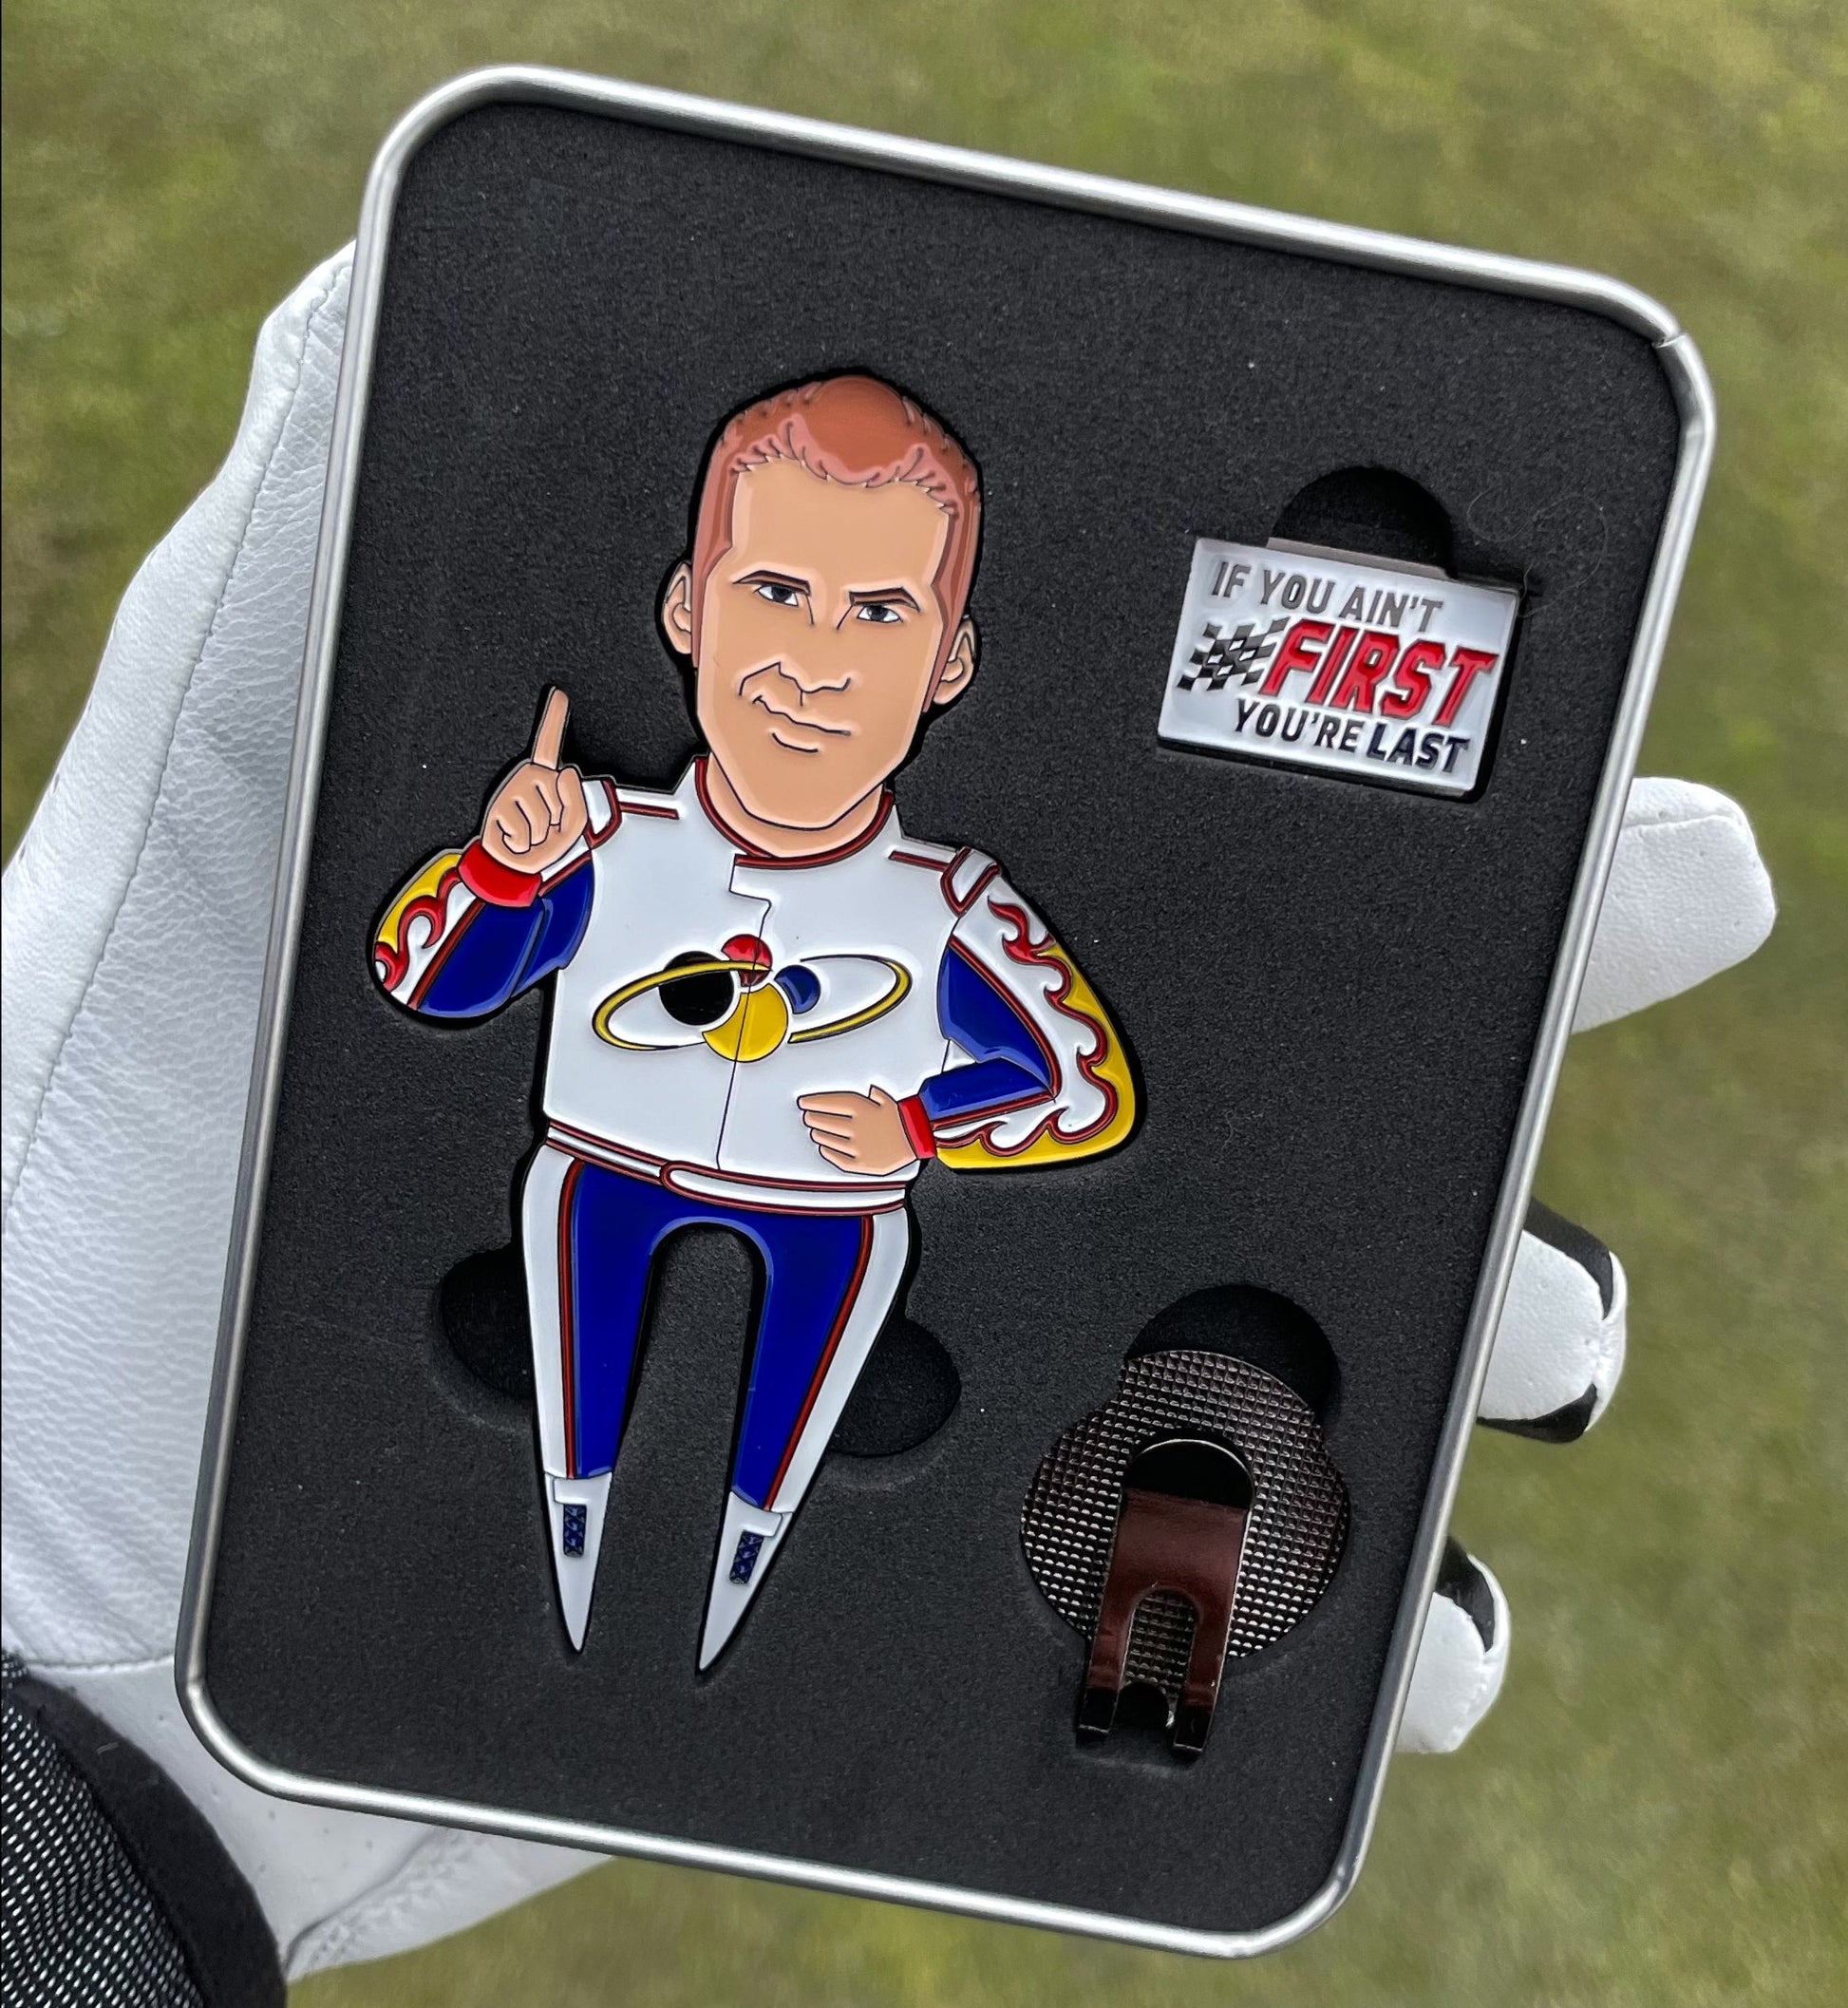 Ricky Bobby Divot Tool for Golf. If you ain't first, you're last. Pin Creatures Divot Tools